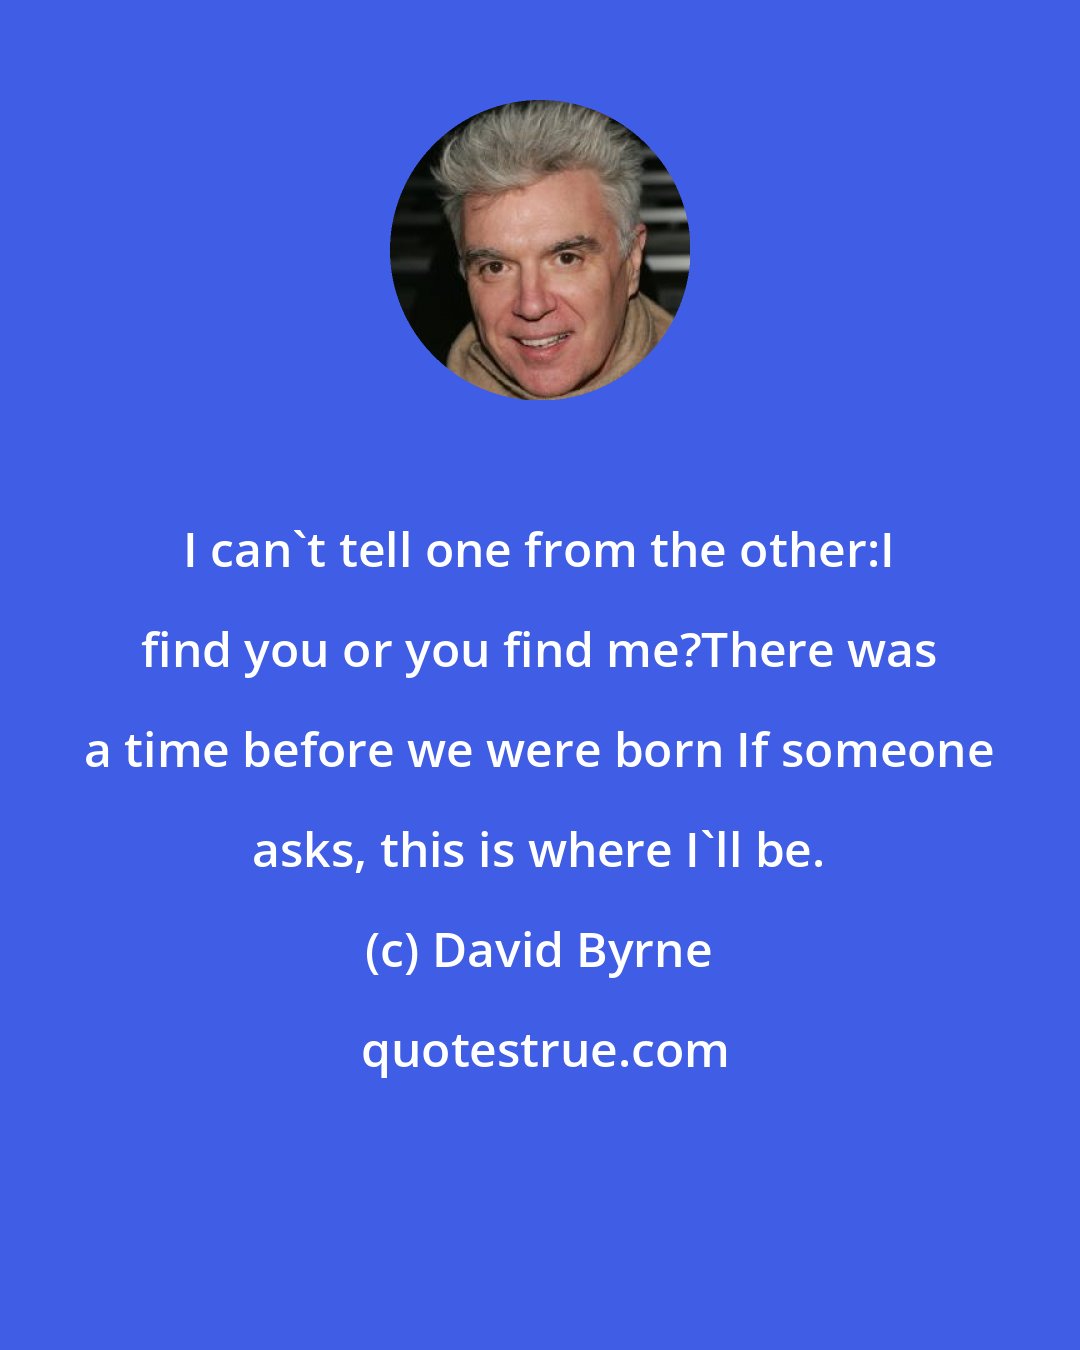 David Byrne: I can't tell one from the other:I find you or you find me?There was a time before we were born If someone asks, this is where I'll be.